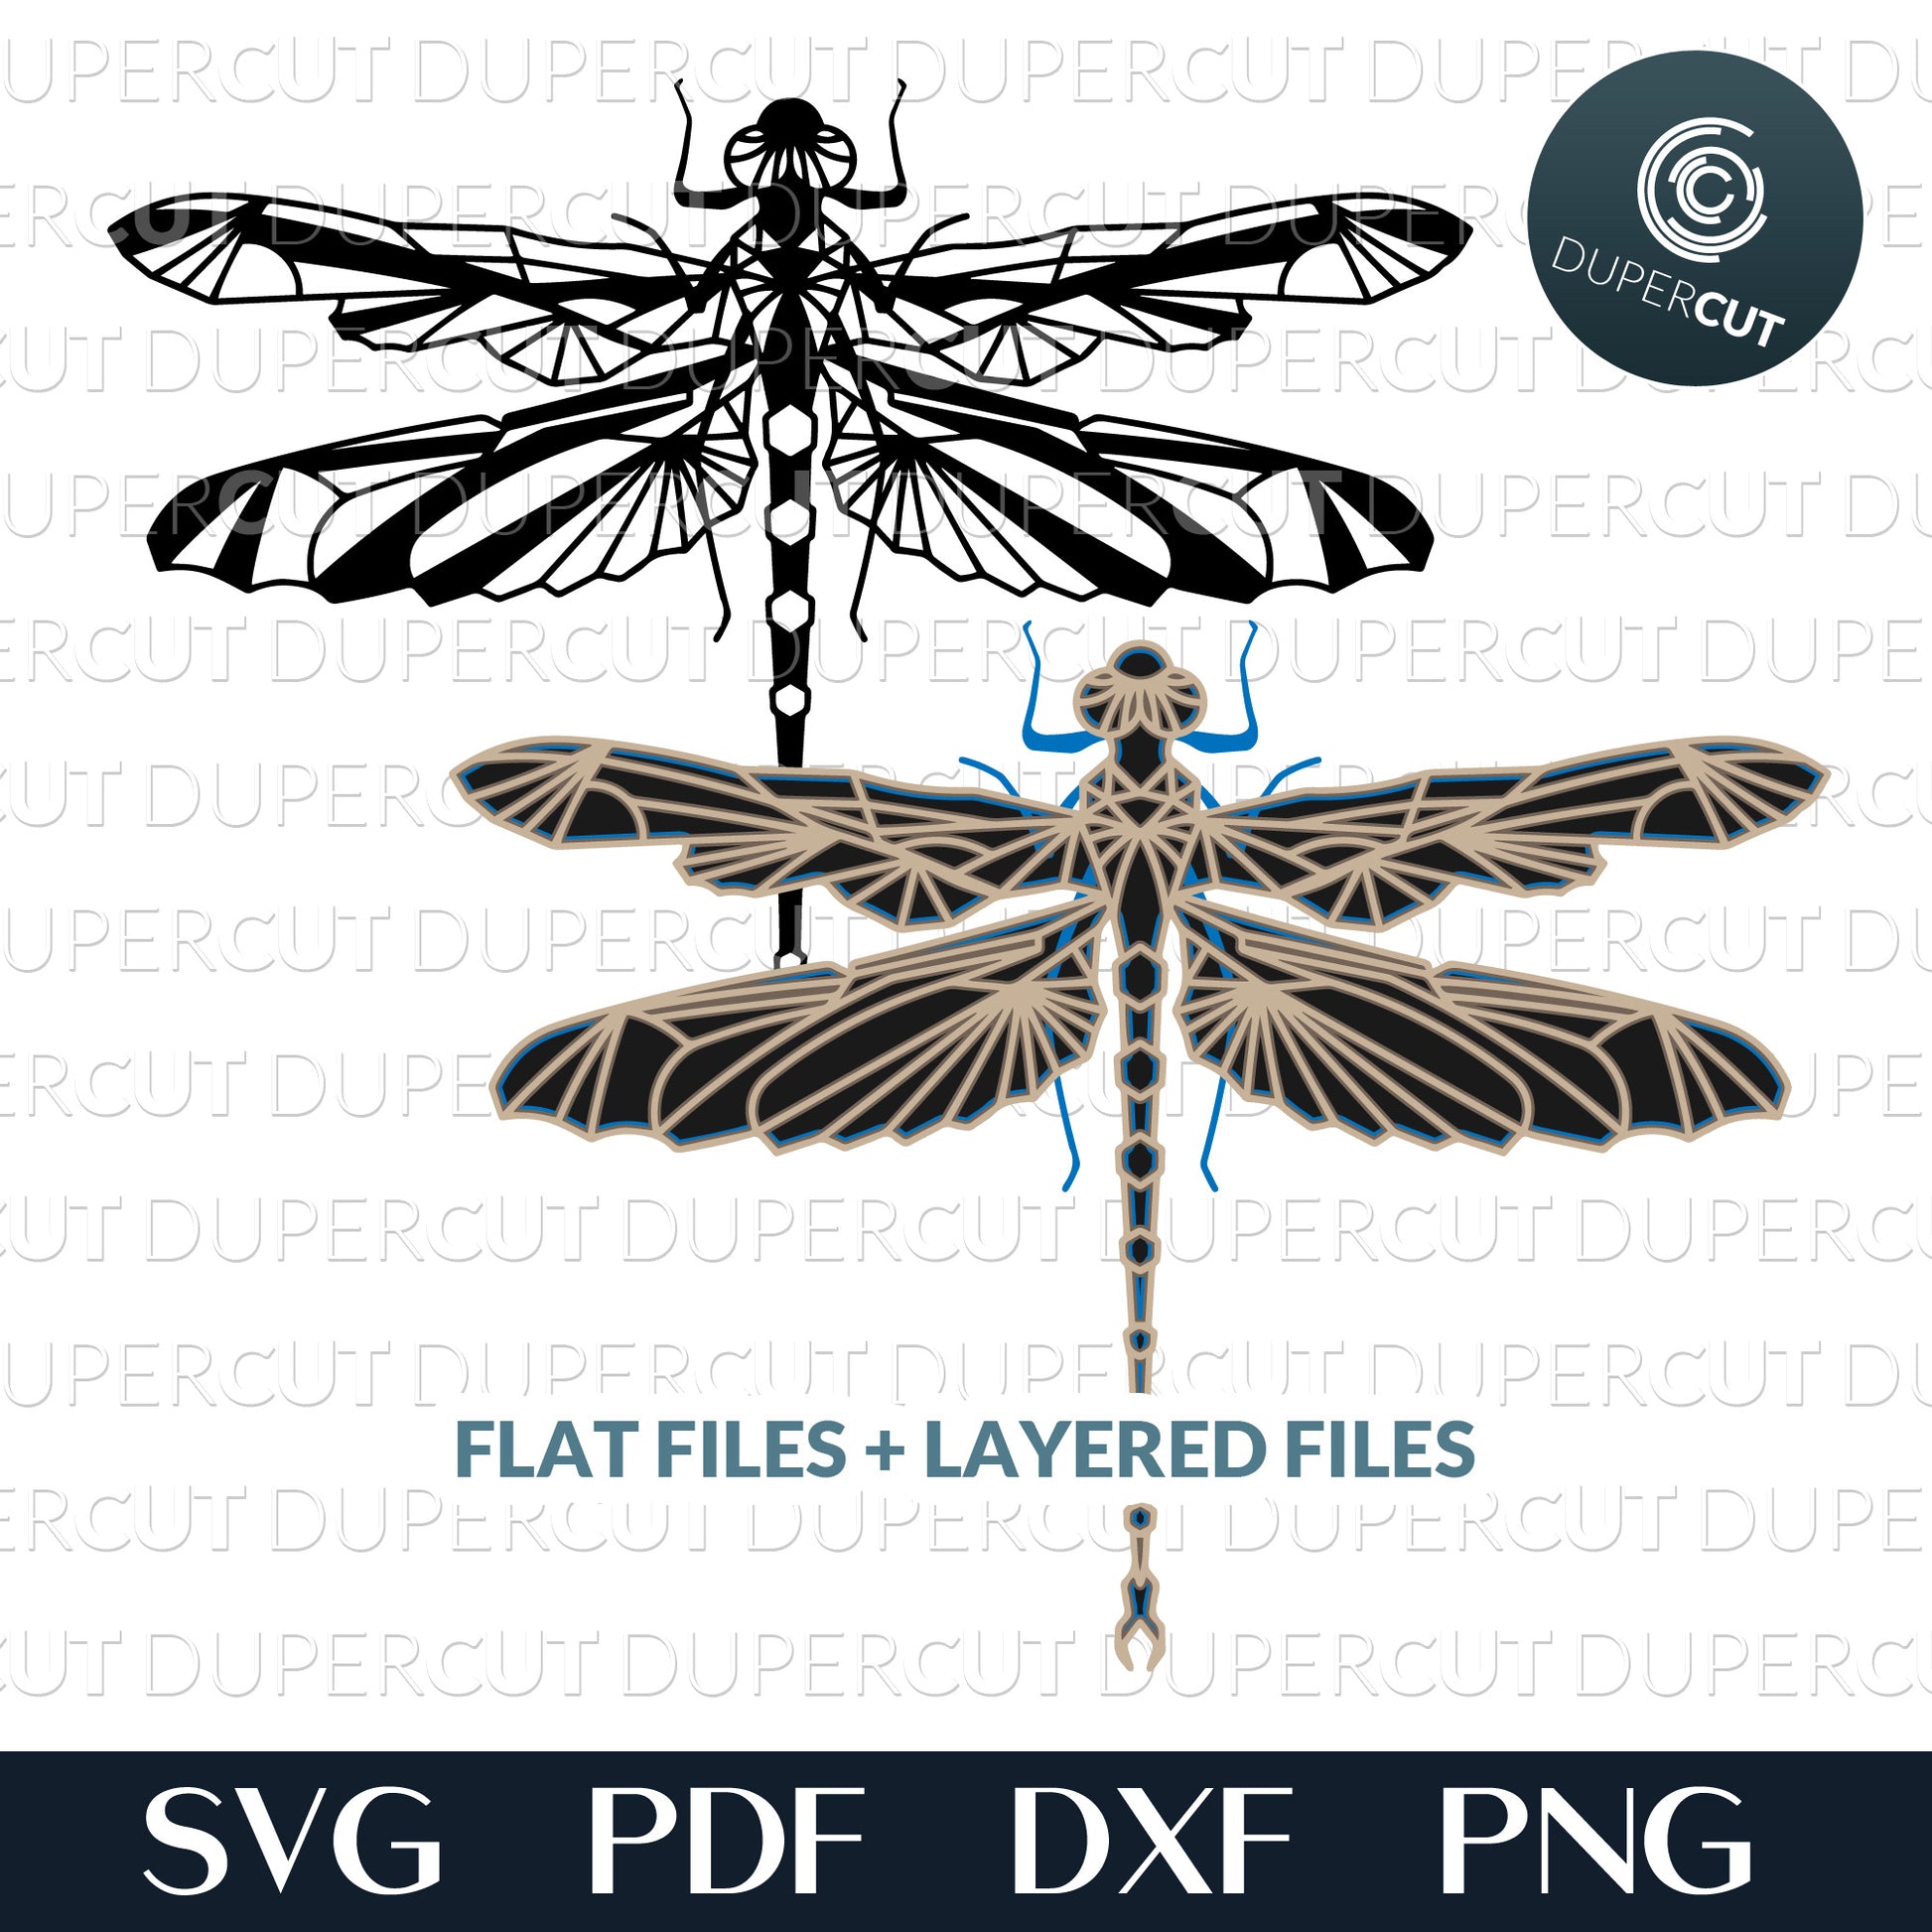 Dragonfly silhouette, multi-layer design, SVG PNG DXF files for cutting, laser engraving, scrapbooking. For use with Cricut, Glowforge, Silhouette, CNC machines.